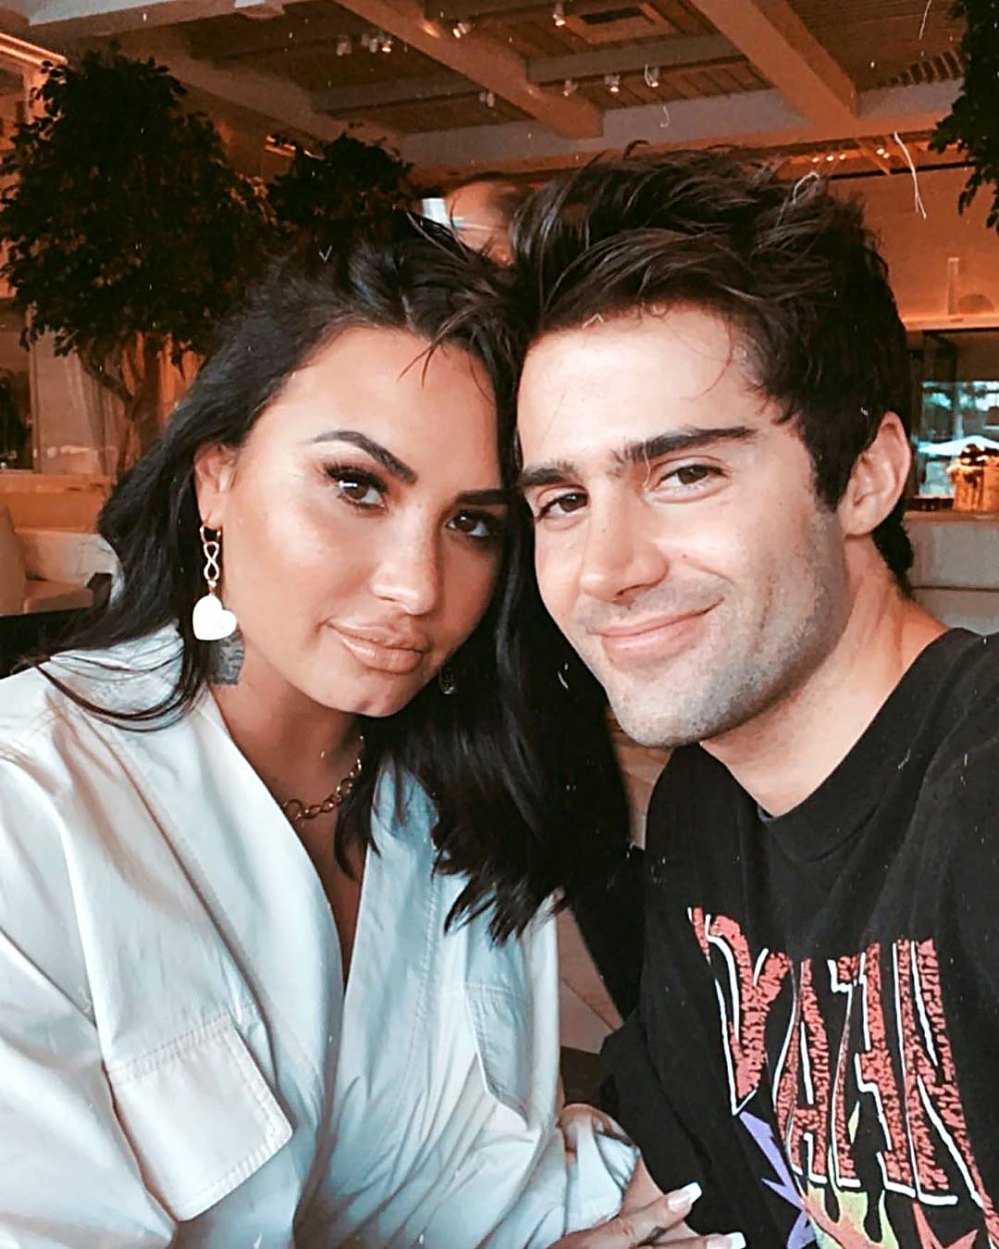 https://www.usmagazine.com/wp-content/uploads/2020/09/Demi-Lovato-Max-Ehrich-Friends-Are-Skeptical-Their-Relationship-01.jpg?w=1000&quality=86&strip=all